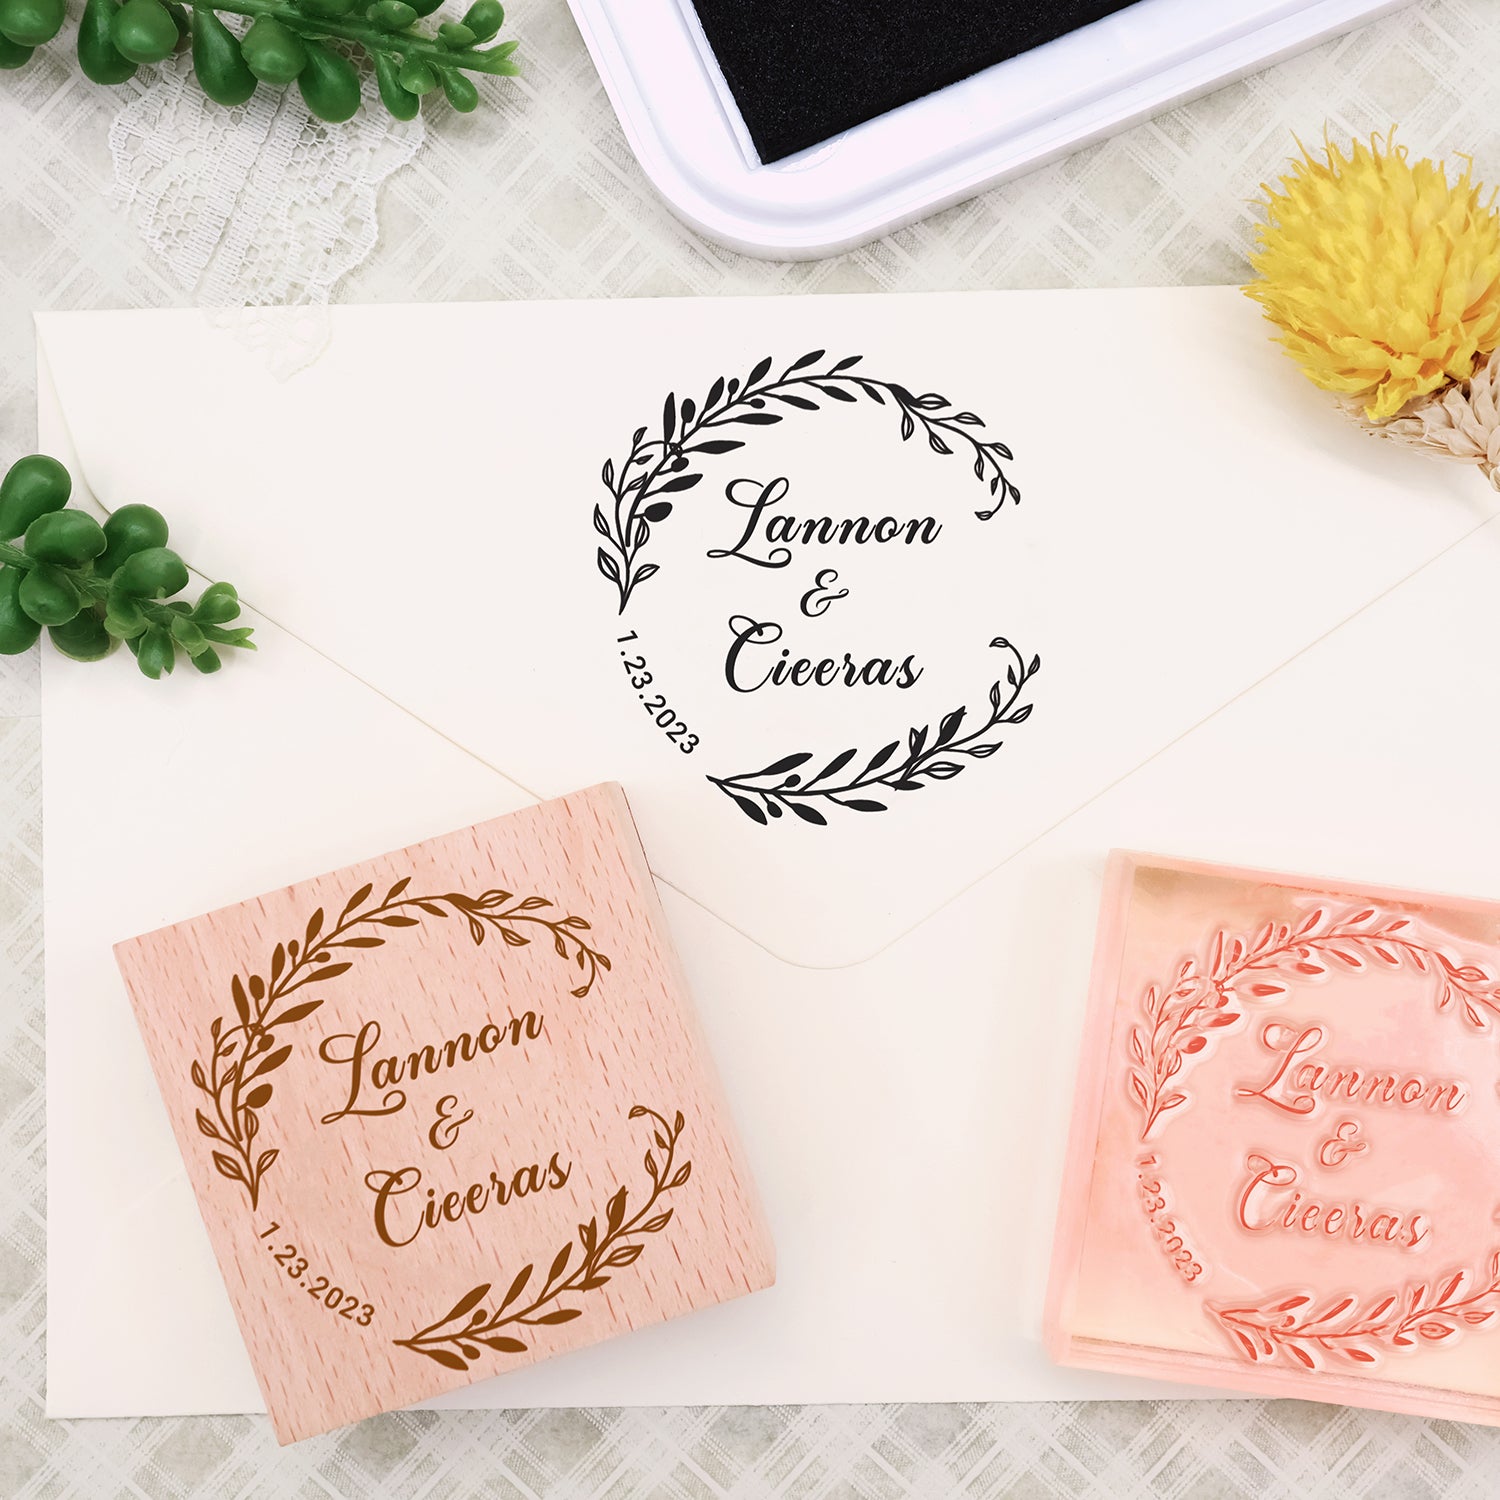 Giveaway: American Made Customized Stamp from Three Designing